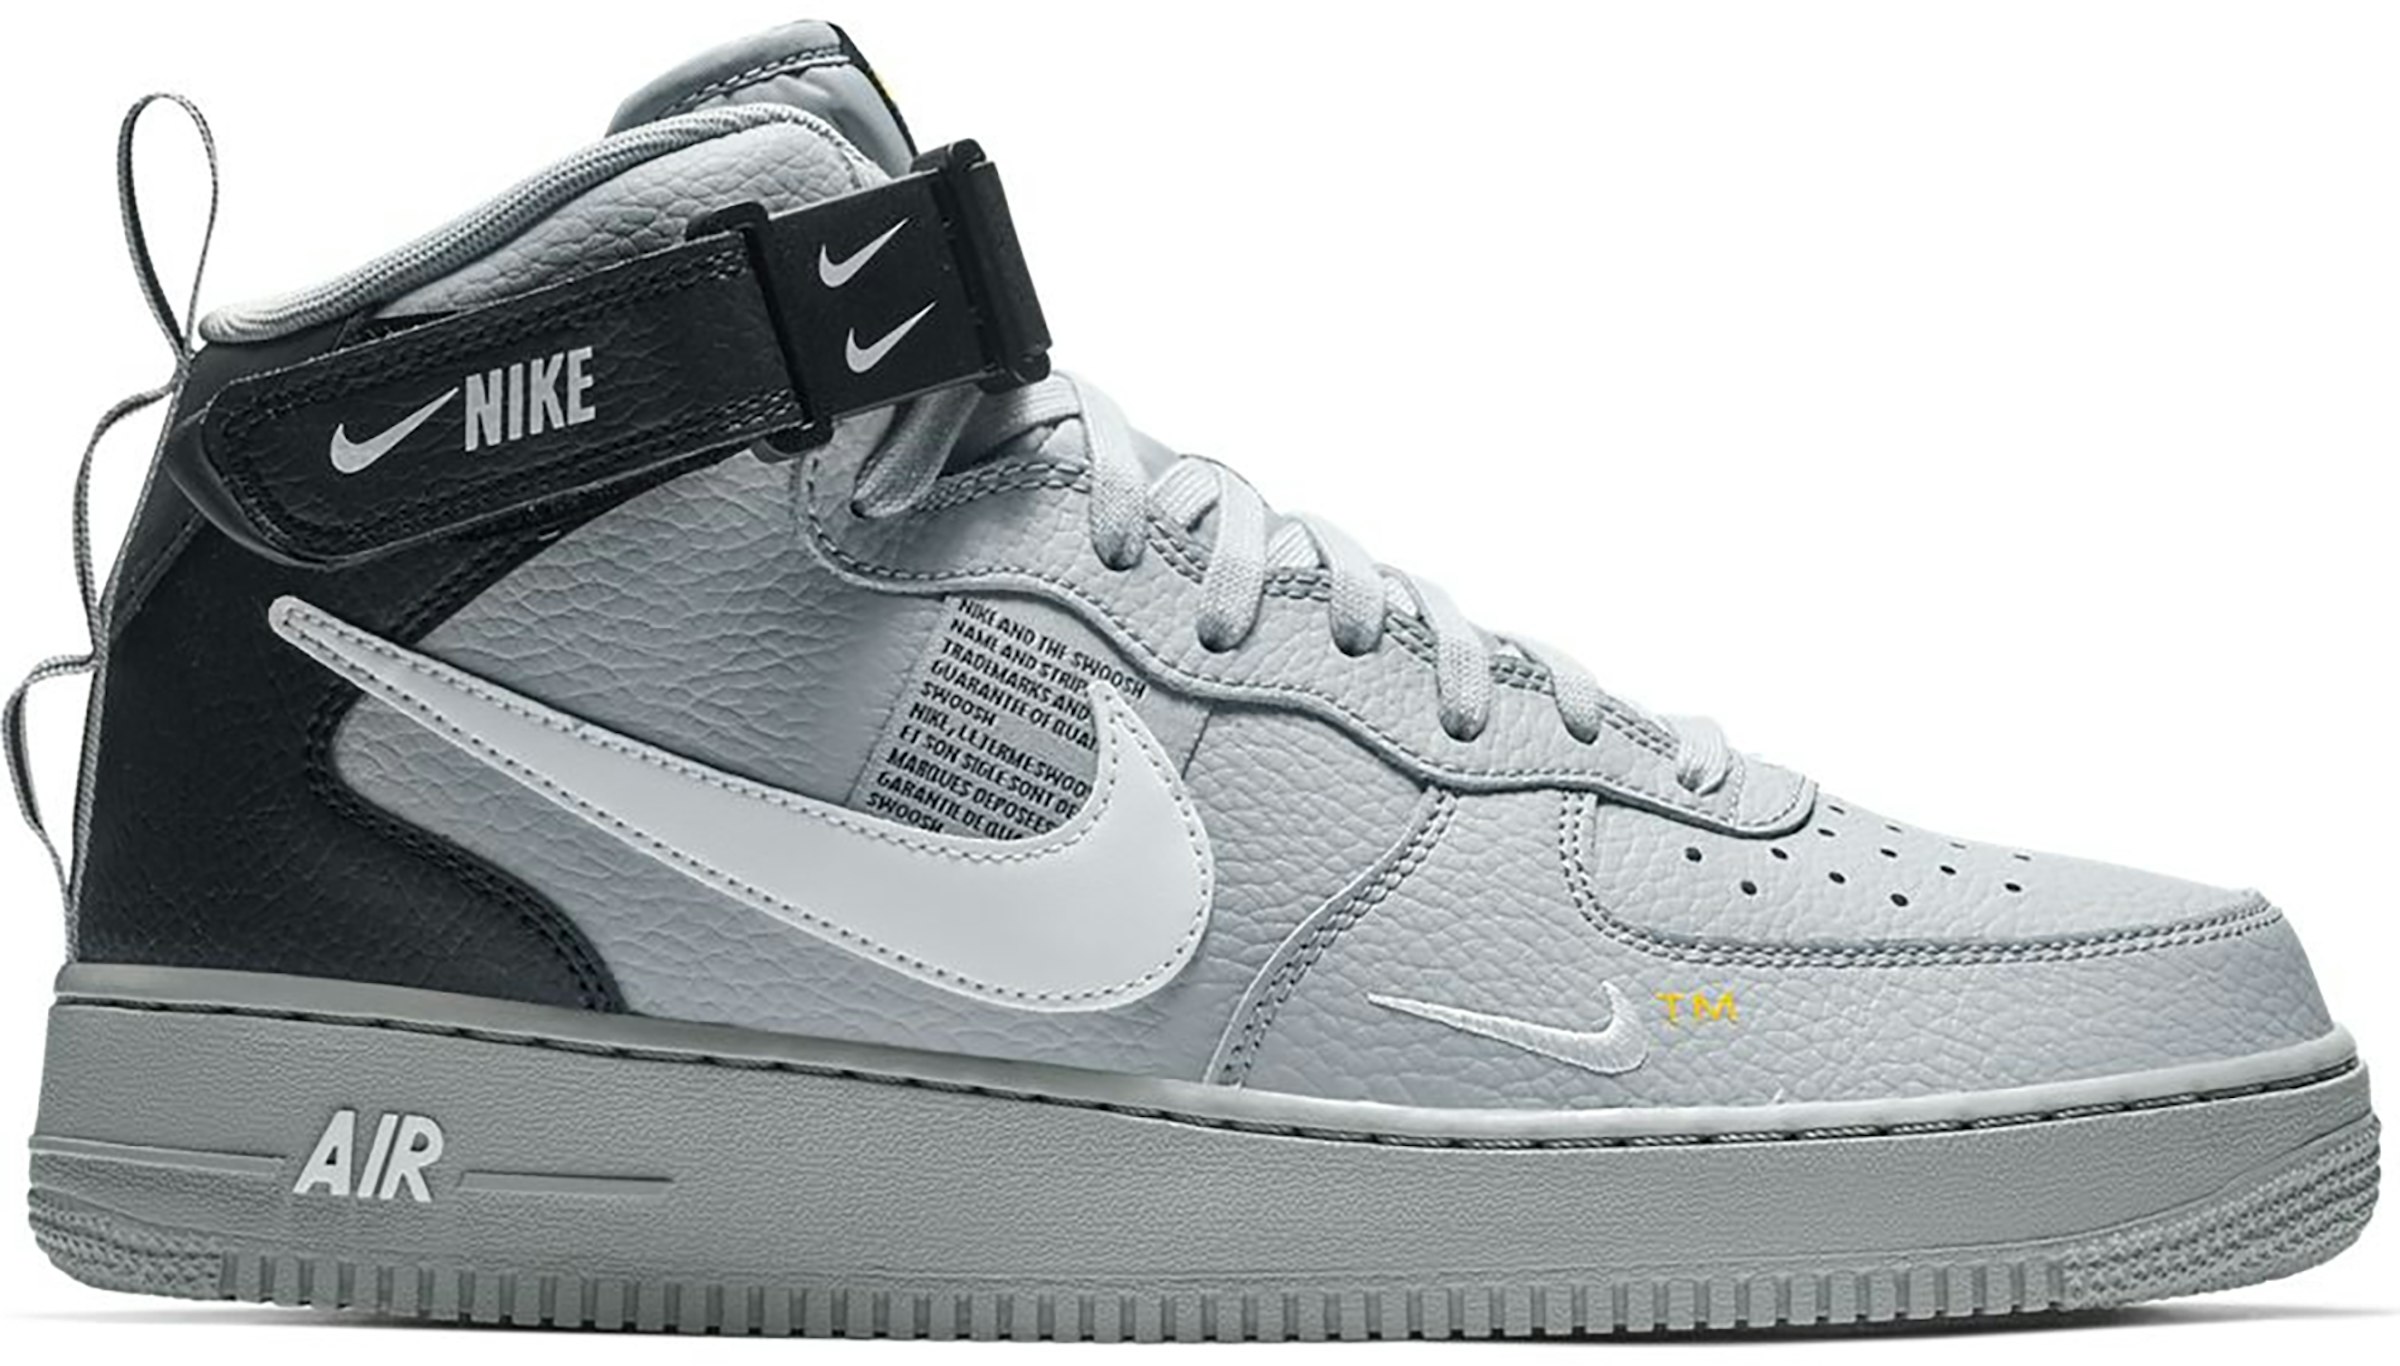 Nike Air Force 1 Mid Utility Wolf Grey Men's - 804609-006 - US